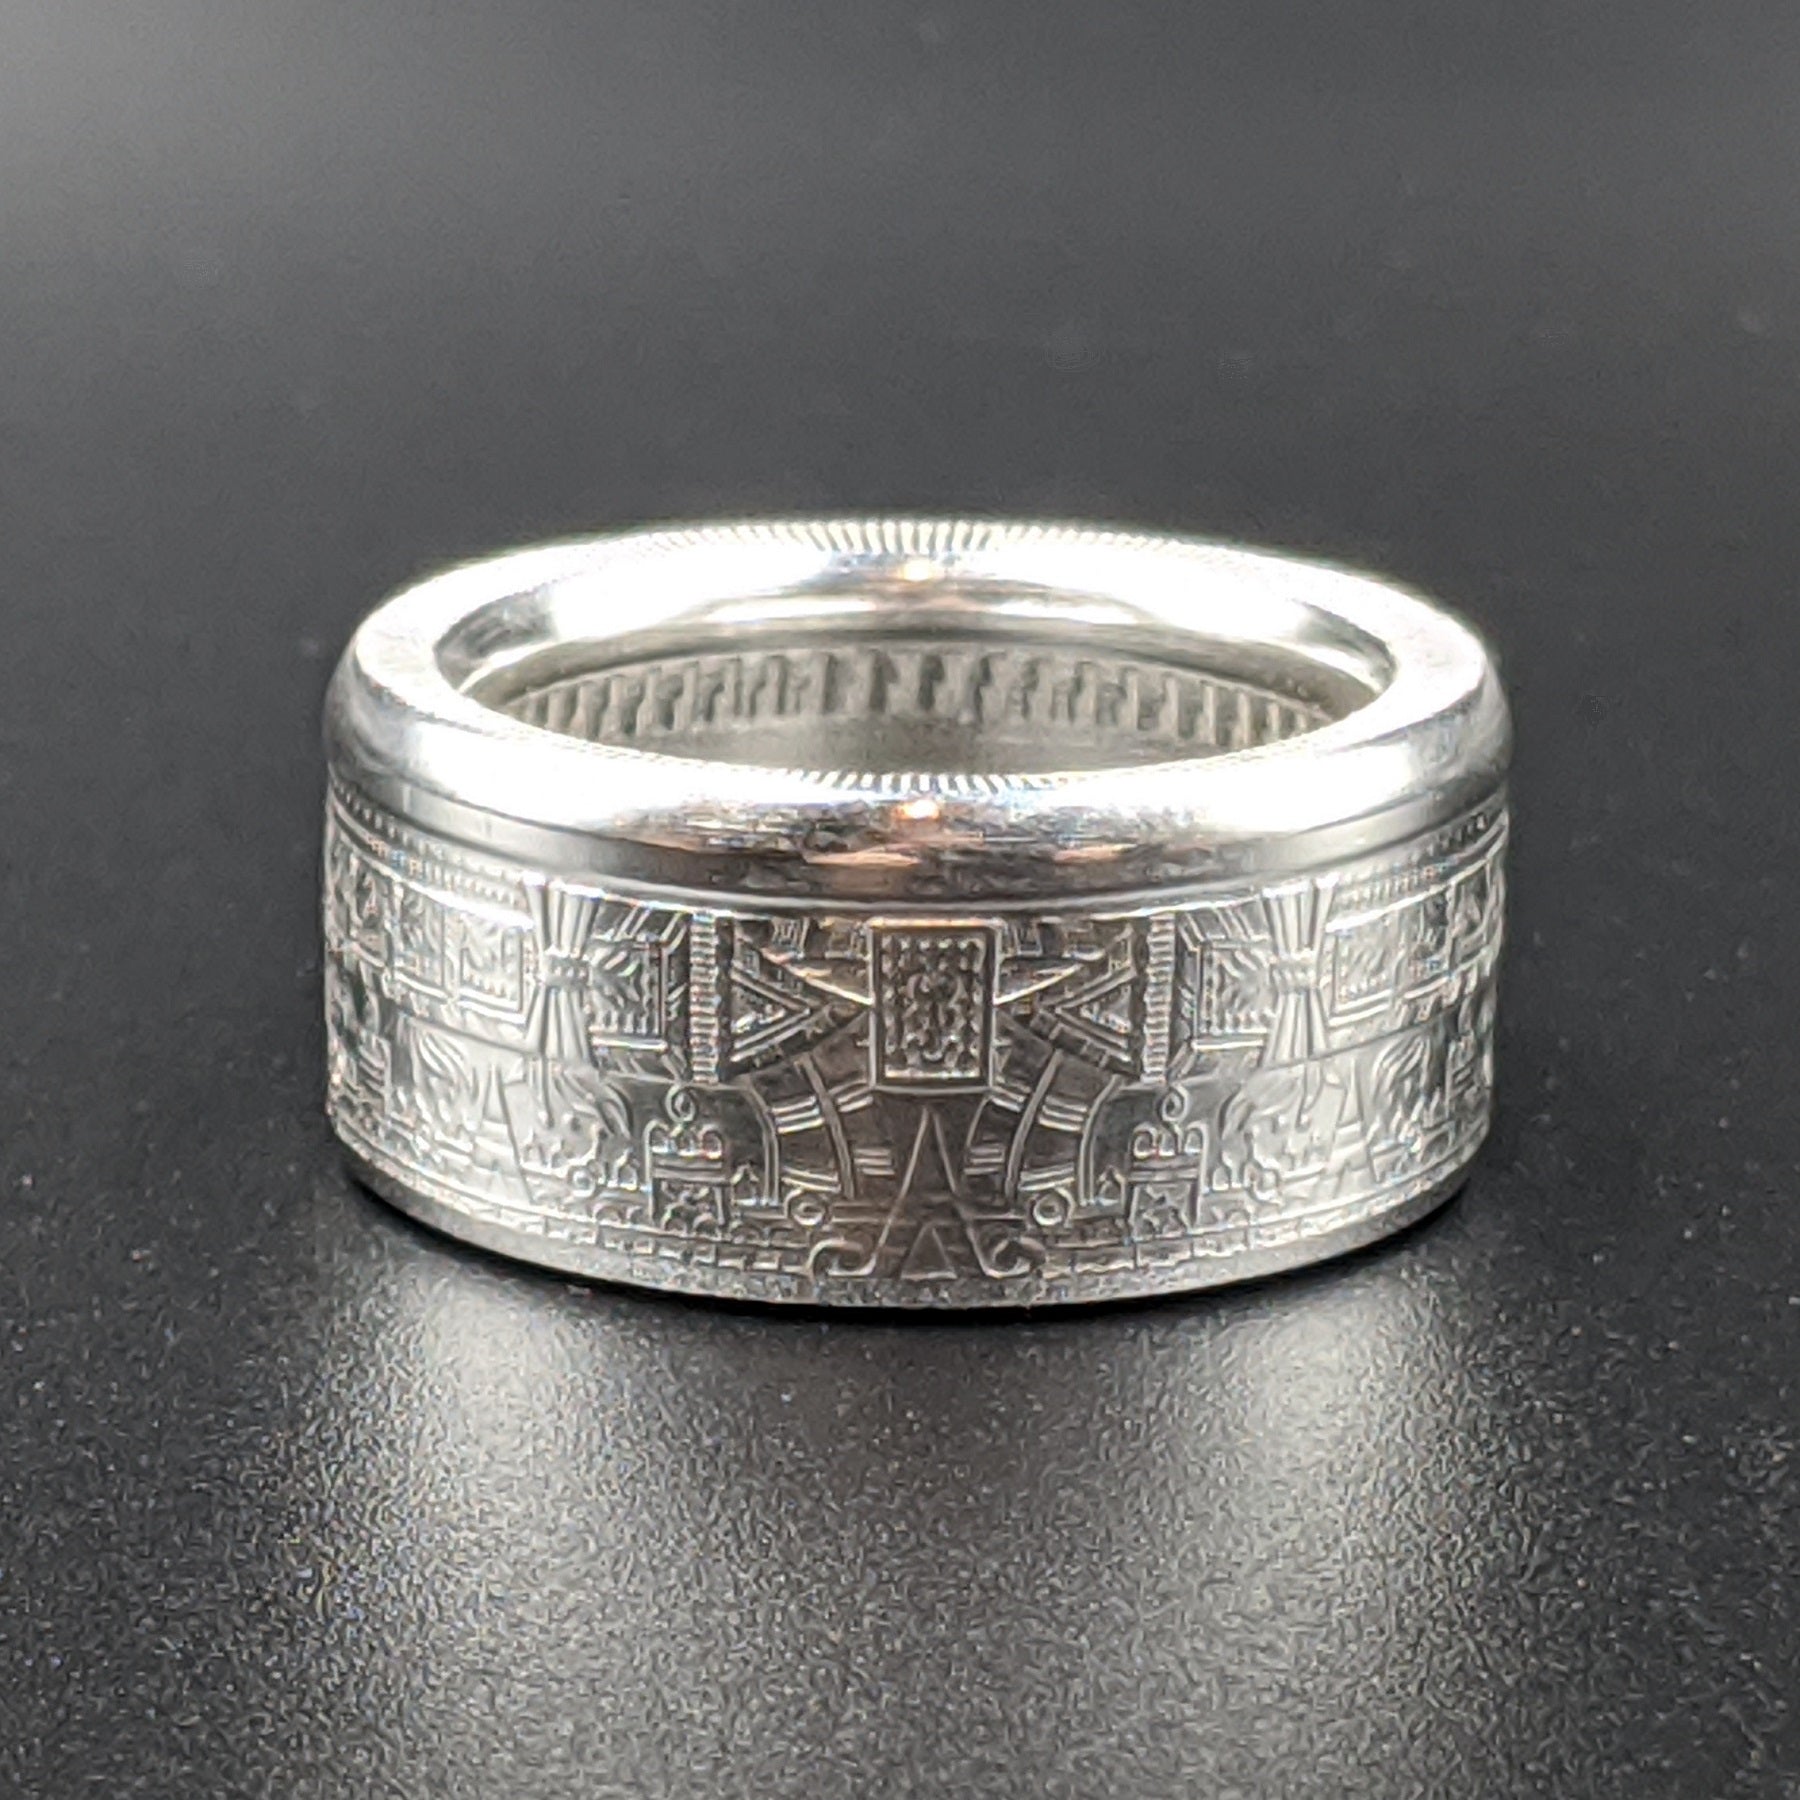 Aztec Calendar Silver Coin Ring - Silver State Foundry